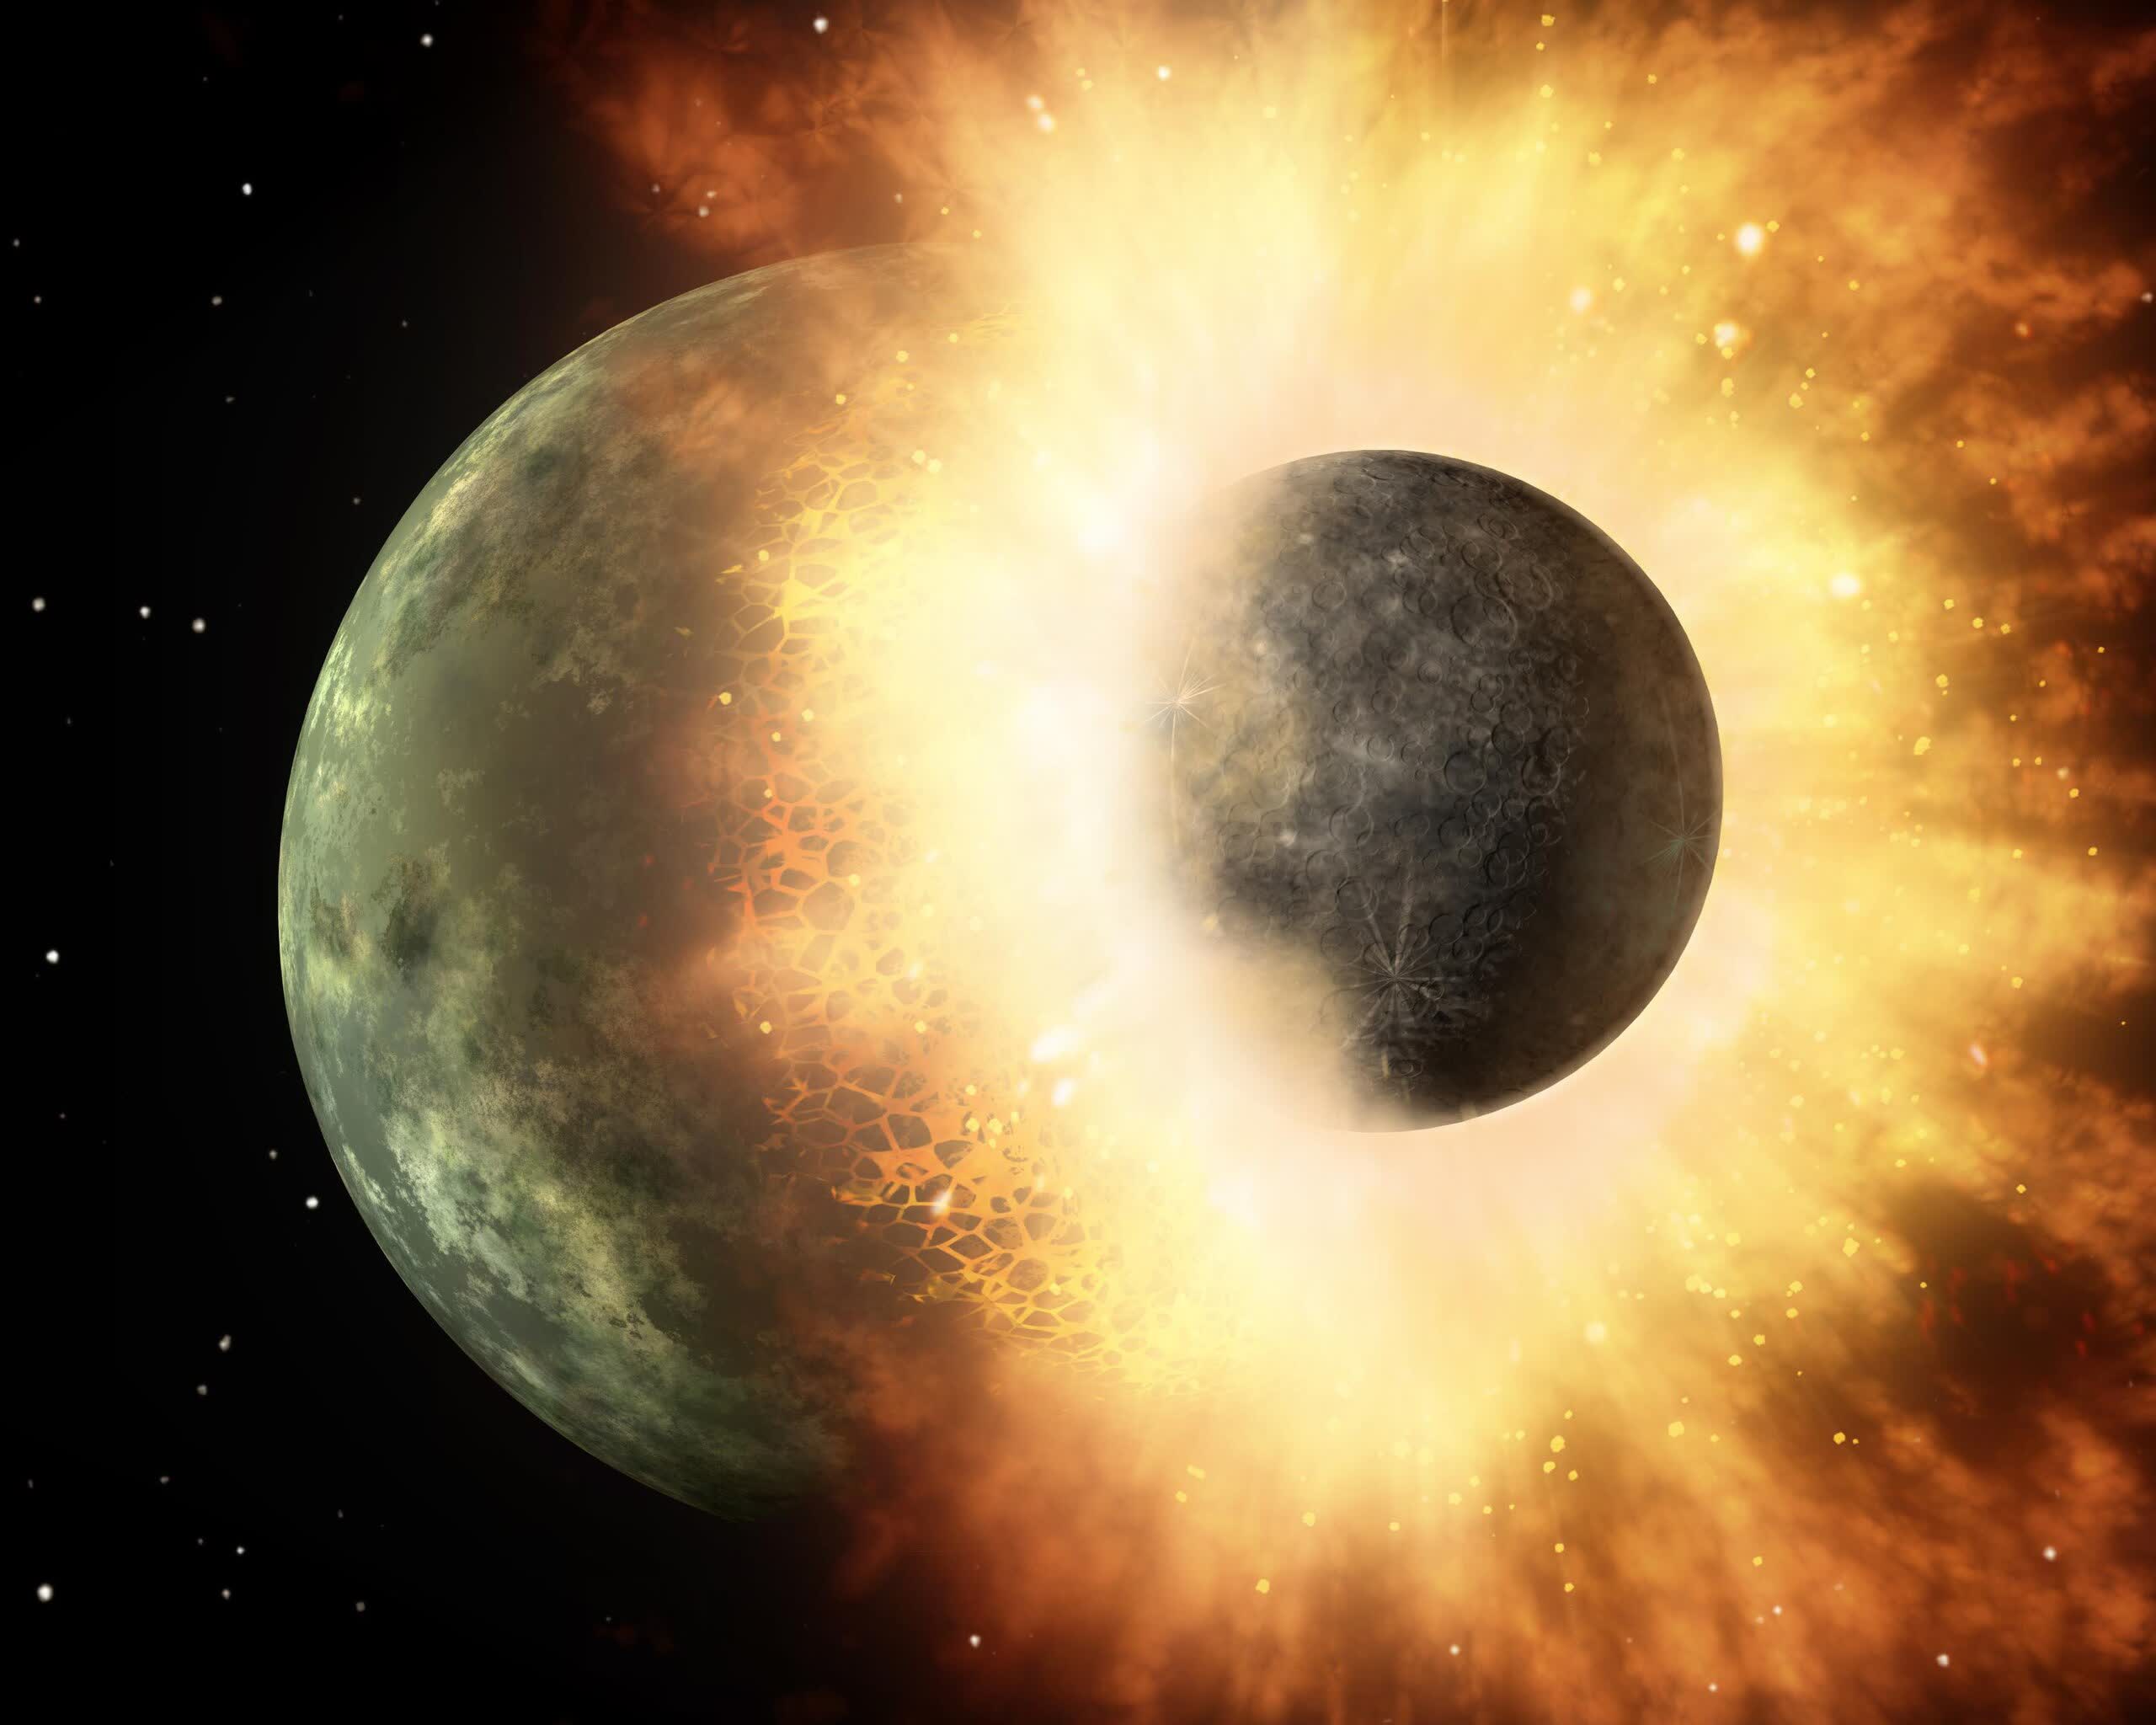 Anomalies in Earth's mantle are remnants of collision with another planet, study concludes